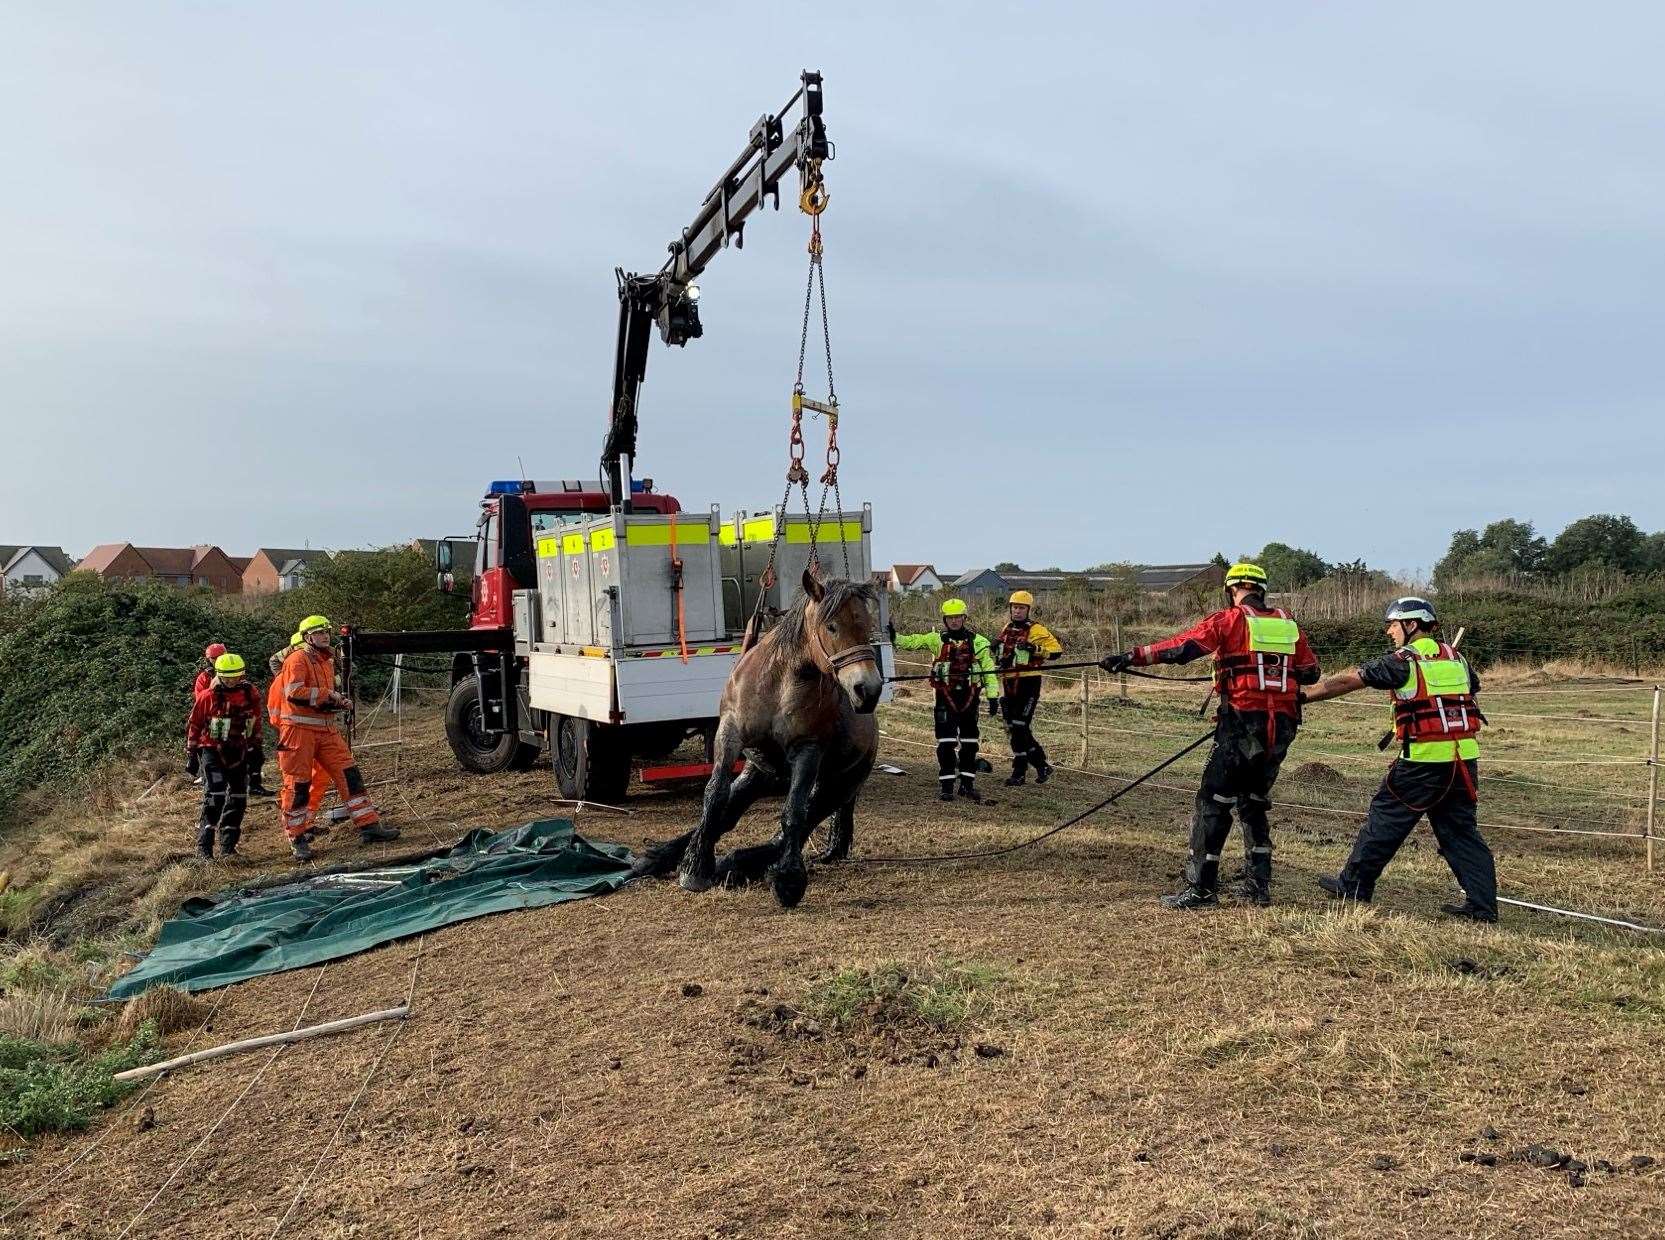 Firefighters were called to help rescue a horse that got stuck in a ditch filled with water. Photo: KFRS